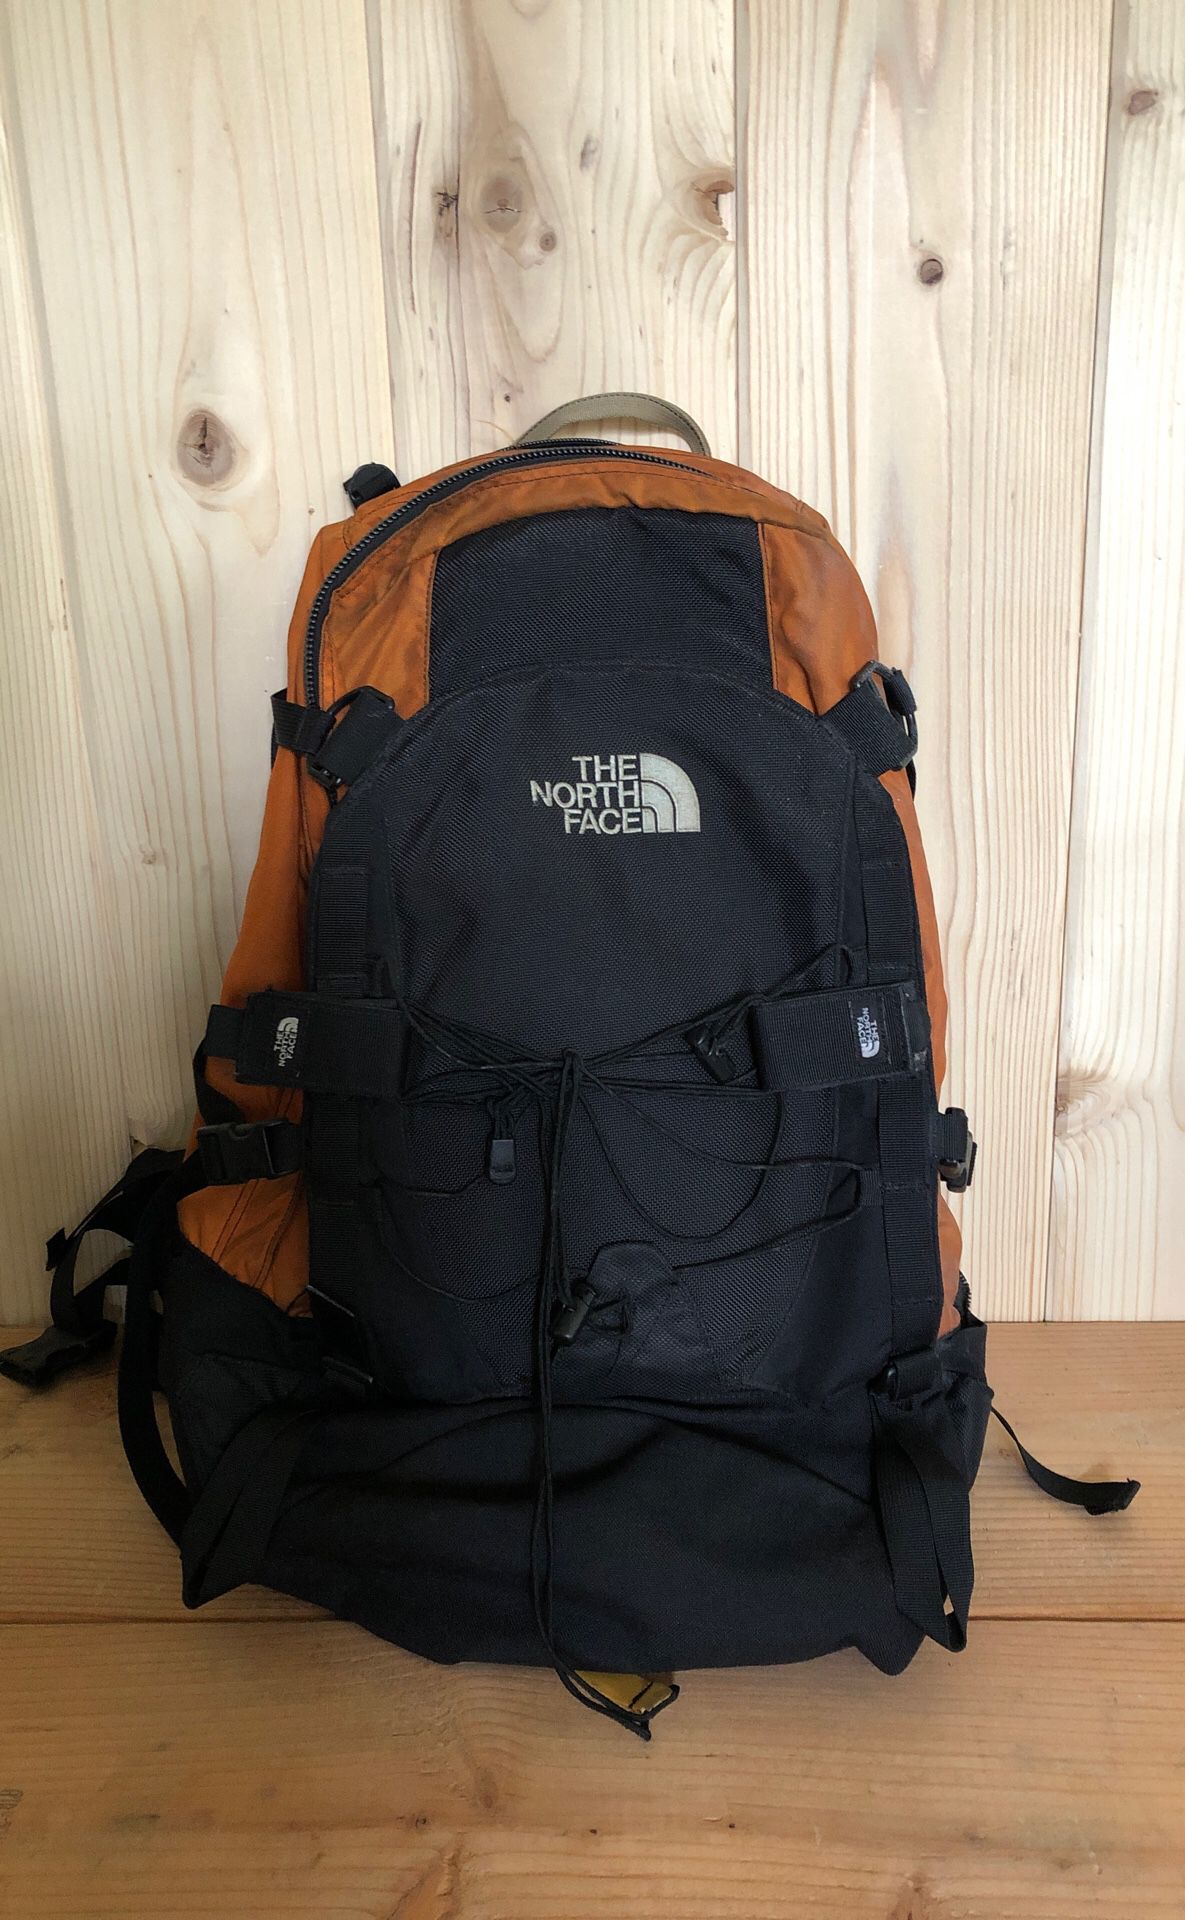 Northface Backpack with Back Support